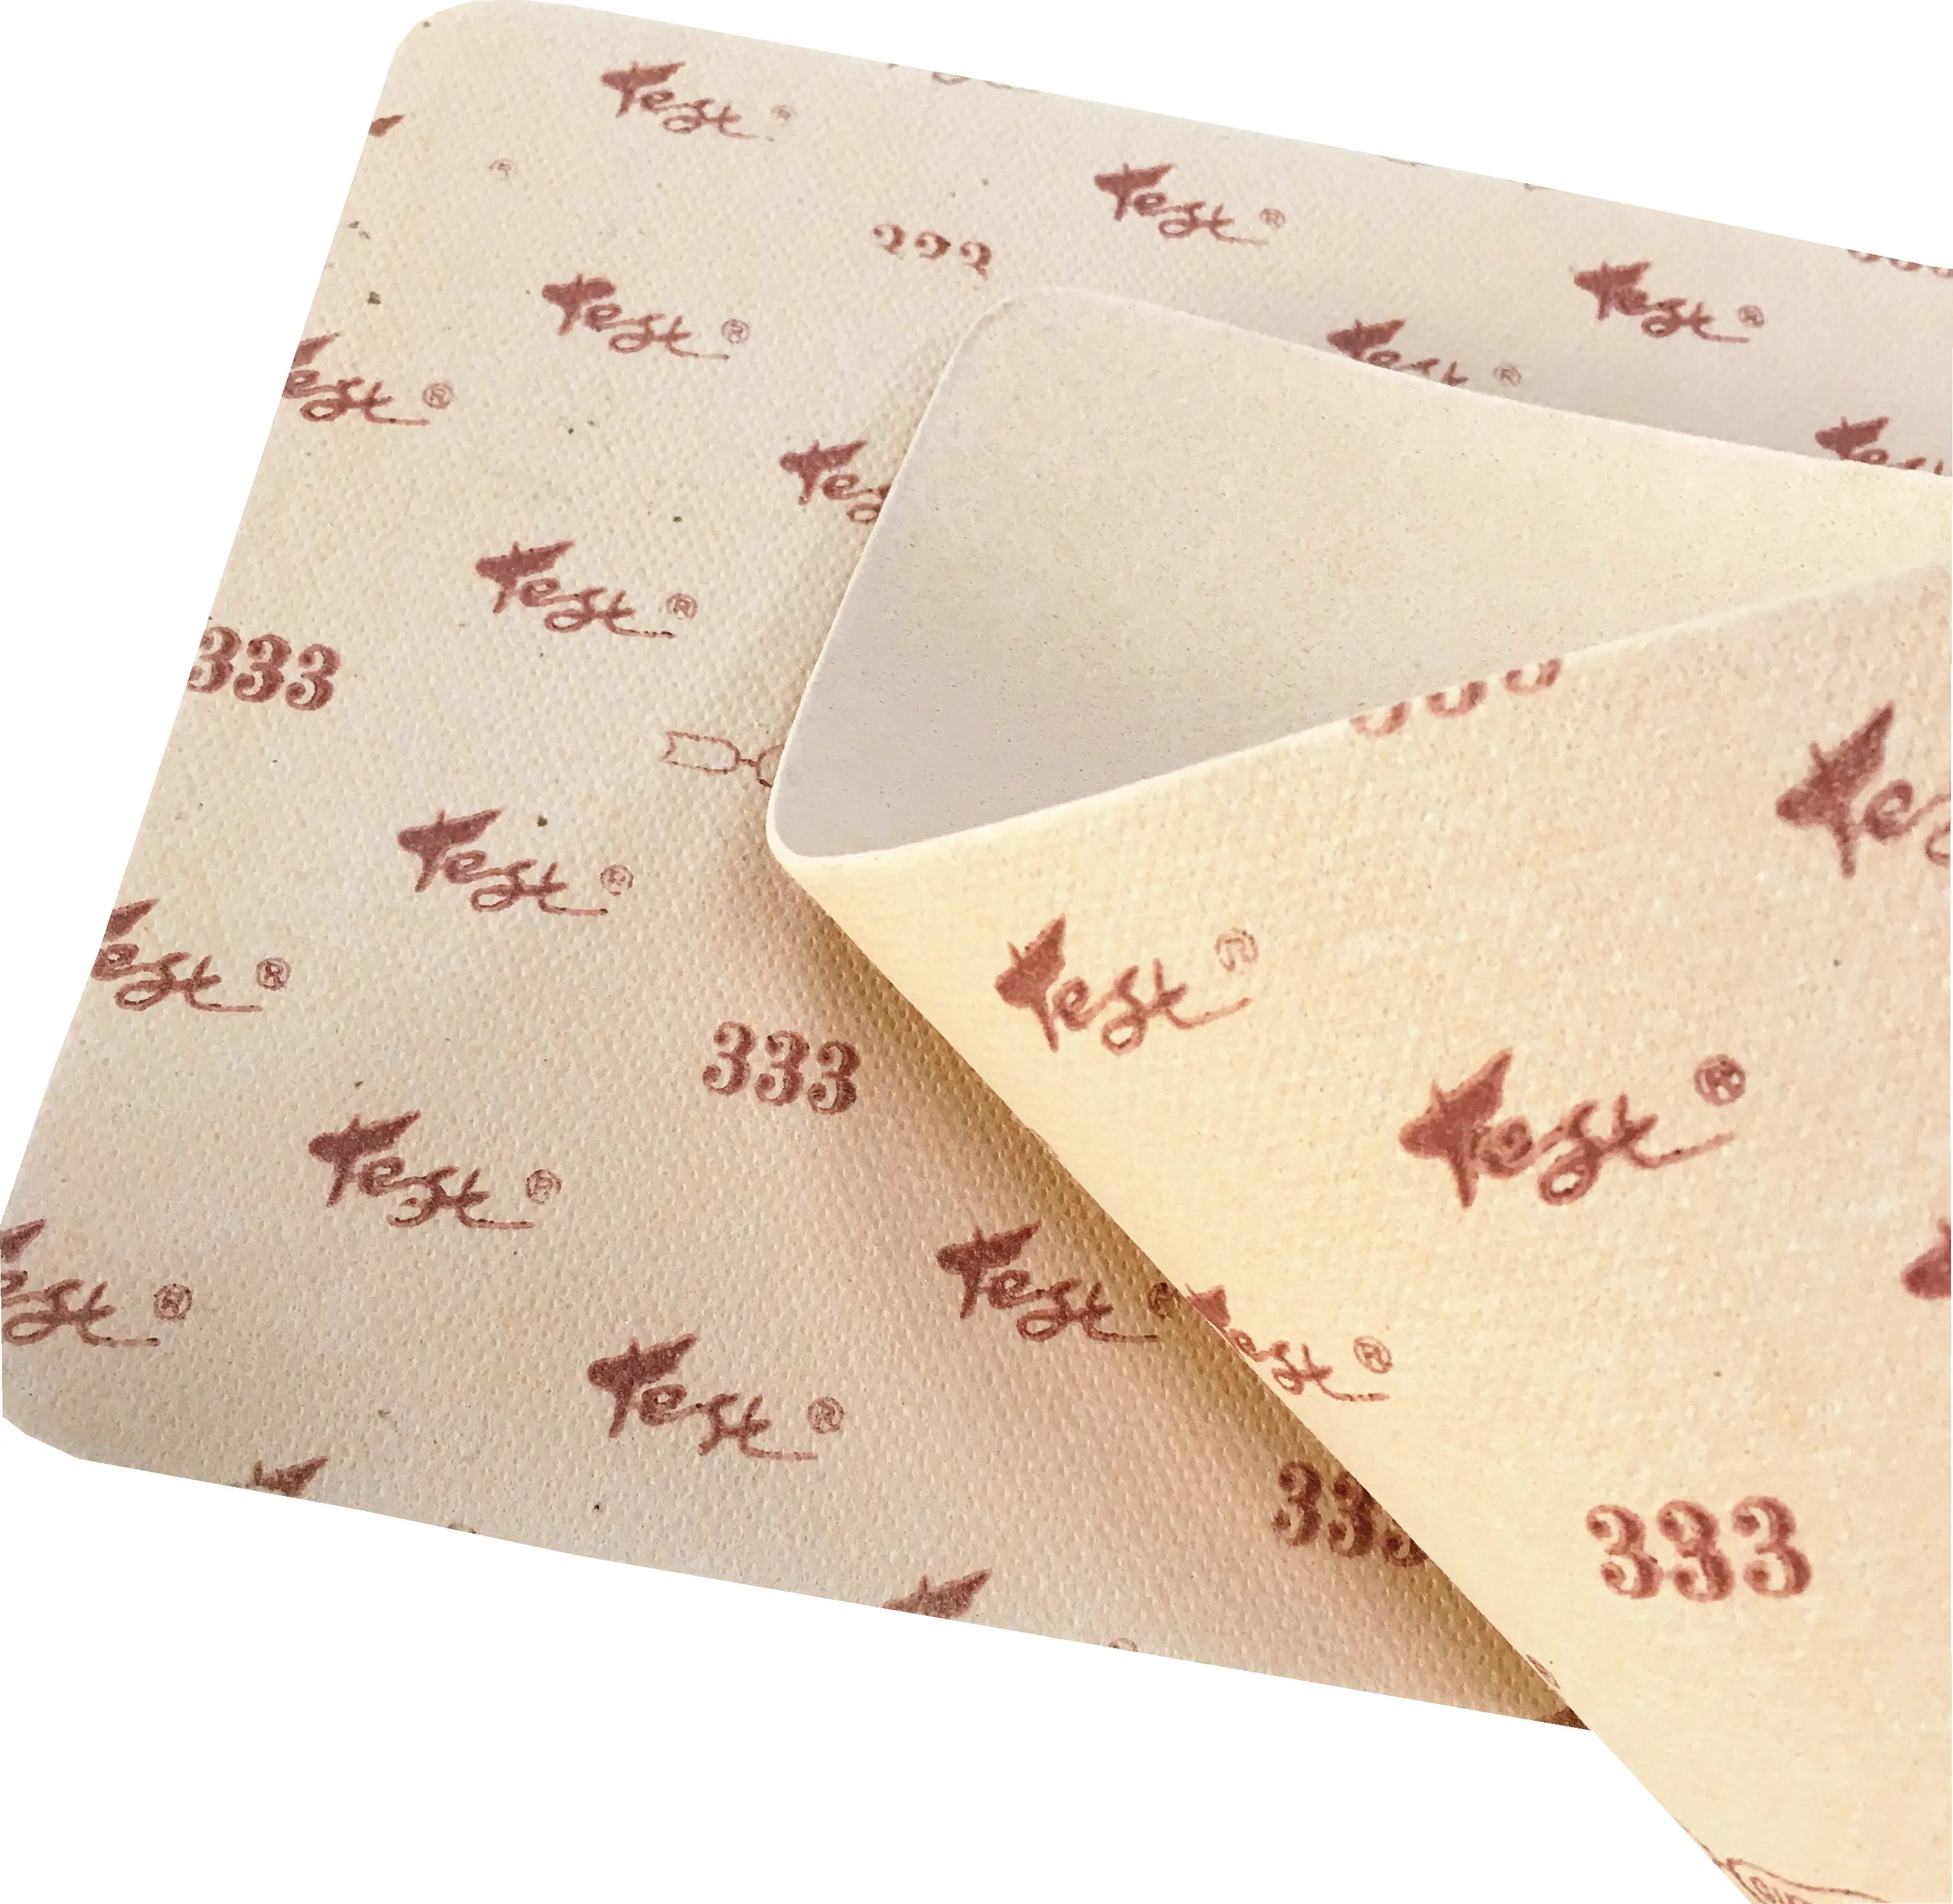 
Hot Sale Environment-friendly Shoes Material NonWoven Insole Board for Footwear 